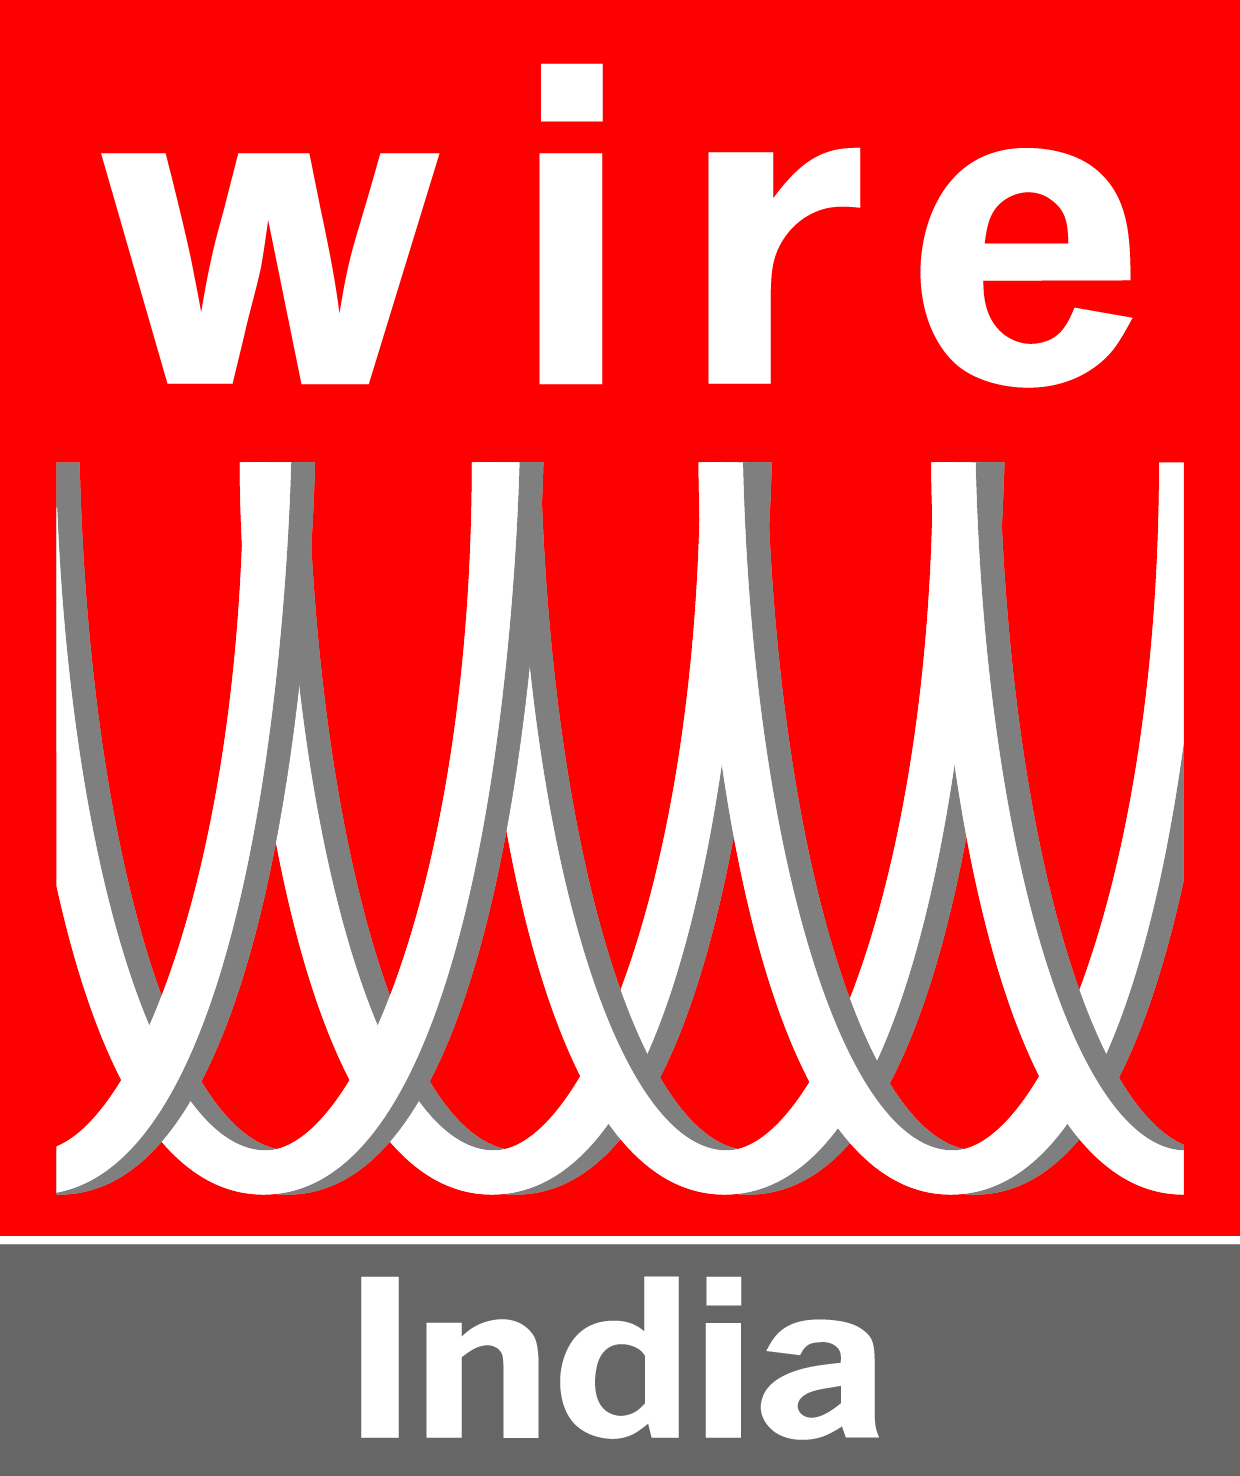 International Exhibition and Conference for the Wire & Cable Industry